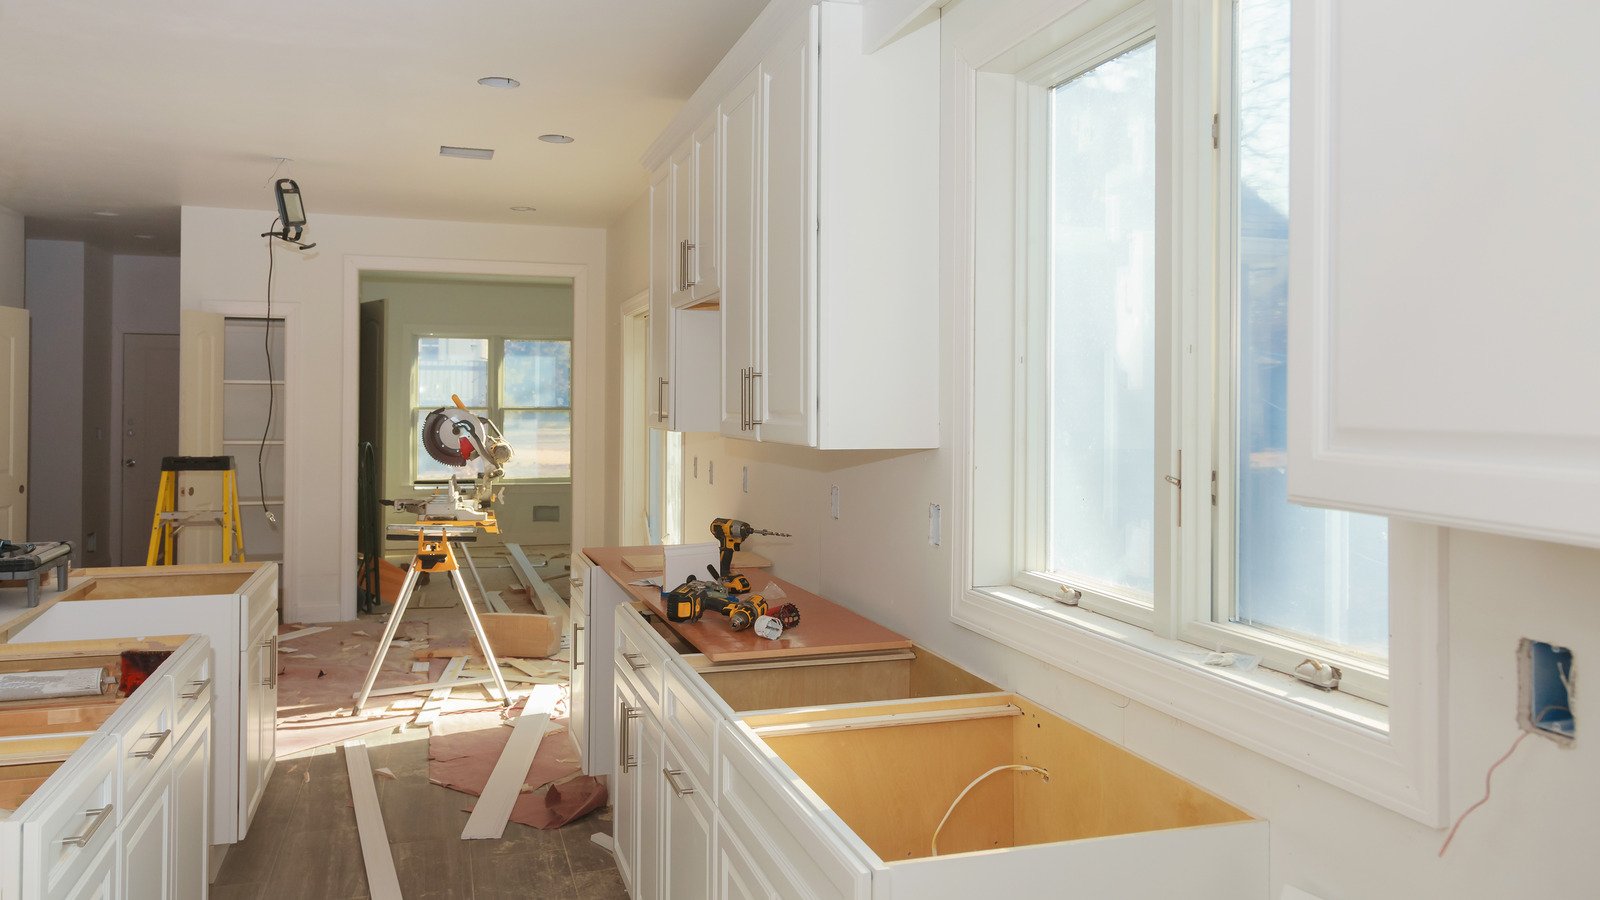 What You Need To Know About Installing Kitchen Cabinets, According To An Expert